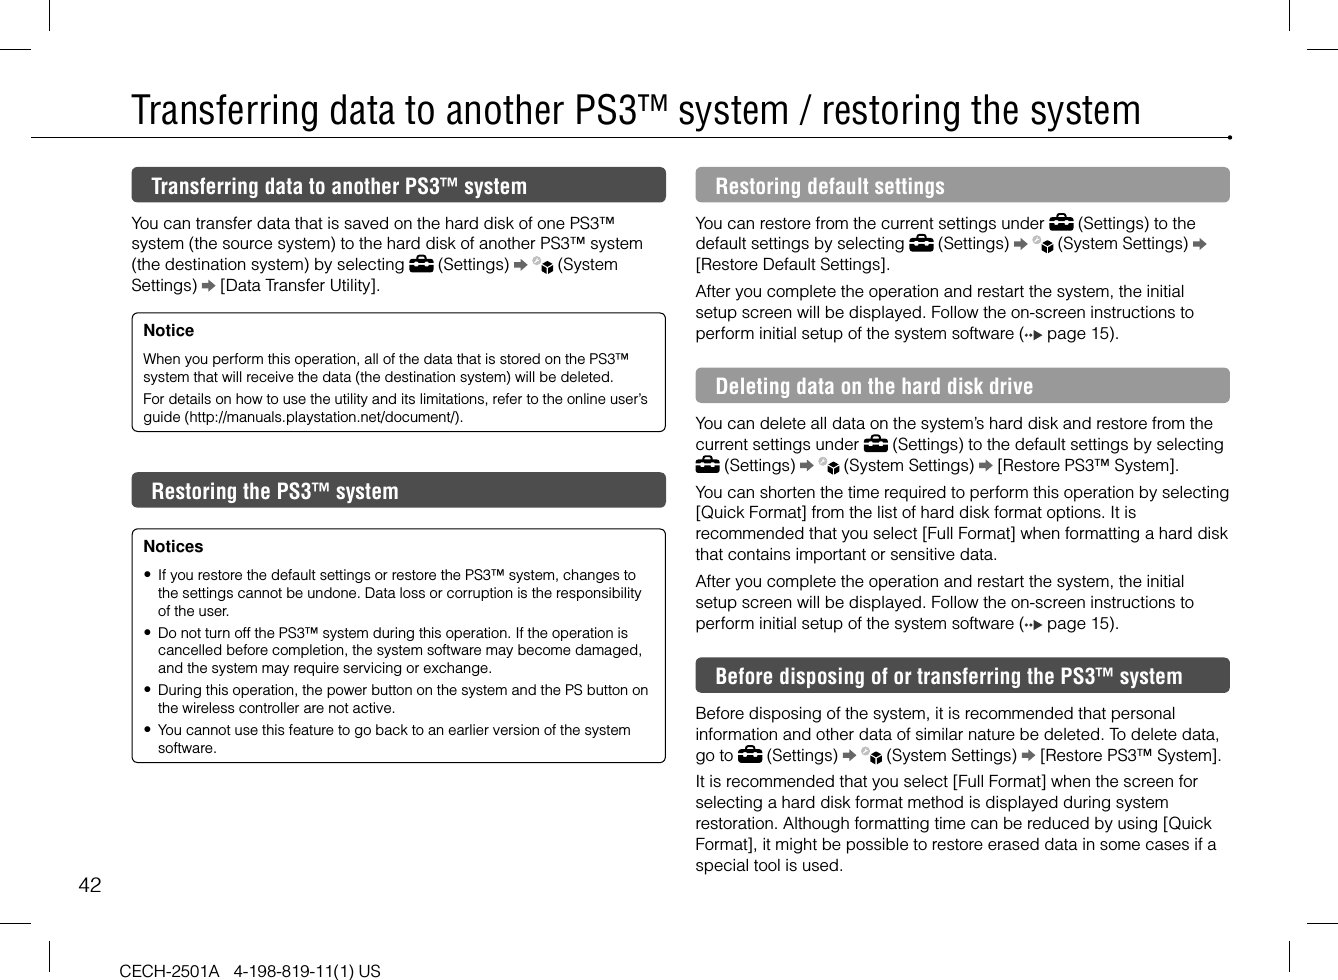 42CECH-2501A   4-198-819-11(1) USTransferring data to another PS3™ system / restoring the systemTransferring data to another PS3™ systemYou can transfer data that is saved on the hard disk of one PS3™ system (the source system) to the hard disk of another PS3™ system (the destination system) by selecting   (Settings)     (System Settings)   [Data Transfer Utility]. NoticeWhen you perform this operation, all of the data that is stored on the PS3™ system that will receive the data (the destination system) will be deleted.For details on how to use the utility and its limitations, refer to the online user’s guide (http://manuals.playstation.net/document/).Restoring the PS3™ system Notices If you restore the default settings or restore the PS3™ system, changes to the settings cannot be undone. Data loss or corruption is the responsibility of the user.  Do not turn off the PS3™ system during this operation. If the operation is cancelled before completion, the system software may become damaged, and the system may require servicing or exchange.  During this operation, the power button on the system and the PS button on the wireless controller are not active.  You cannot use this feature to go back to an earlier version of the system software. Restoring default settingsYou can restore from the current settings under   (Settings) to the default settings by selecting   (Settings)     (System Settings)   [Restore Default Settings].After you complete the operation and restart the system, the initial setup screen will be displayed. Follow the on-screen instructions to perform initial setup of the system software (  page 15).Deleting data on the hard disk driveYou can delete all data on the system’s hard disk and restore from the current settings under   (Settings) to the default settings by selecting  (Settings)     (System Settings)   [Restore PS3™ System]. You can shorten the time required to perform this operation by selecting [Quick Format] from the list of hard disk format options. It is recommended that you select [Full Format] when formatting a hard disk that contains important or sensitive data. After you complete the operation and restart the system, the initial setup screen will be displayed. Follow the on-screen instructions to perform initial setup of the system software (  page 15).Before disposing of or transferring the PS3™ systemBefore disposing of the system, it is recommended that personal information and other data of similar nature be deleted. To delete data, go to   (Settings)     (System Settings)   [Restore PS3™ System].It is recommended that you select [Full Format] when the screen for selecting a hard disk format method is displayed during system restoration. Although formatting time can be reduced by using [Quick Format], it might be possible to restore erased data in some cases if a special tool is used.